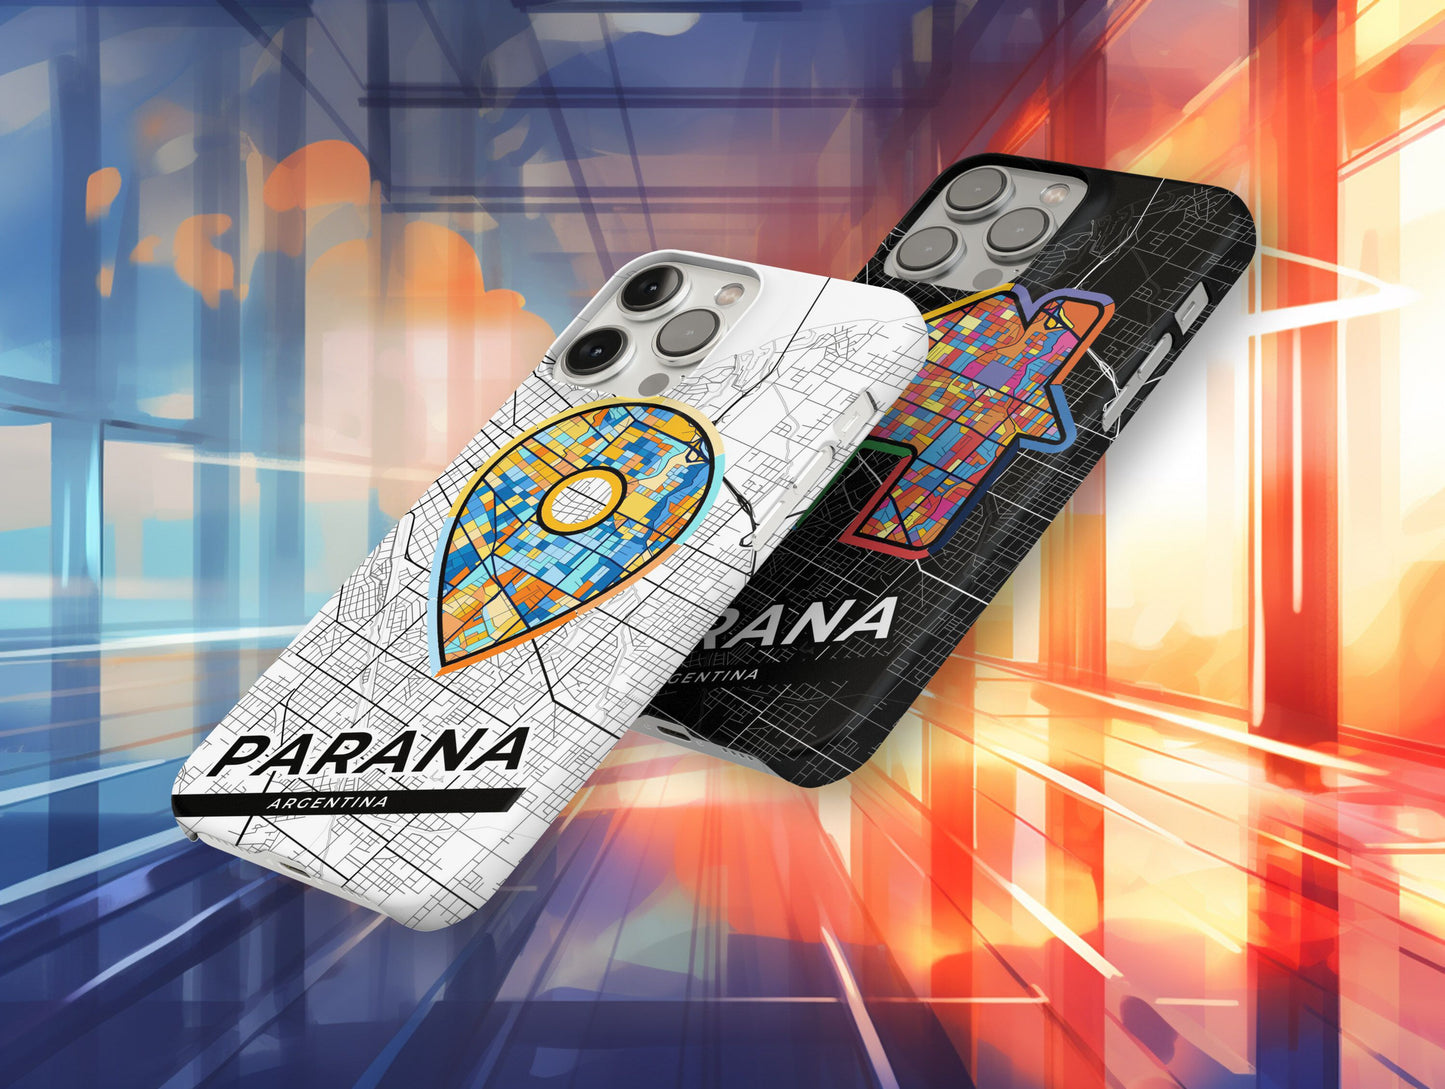 Parana Argentina slim phone case with colorful icon